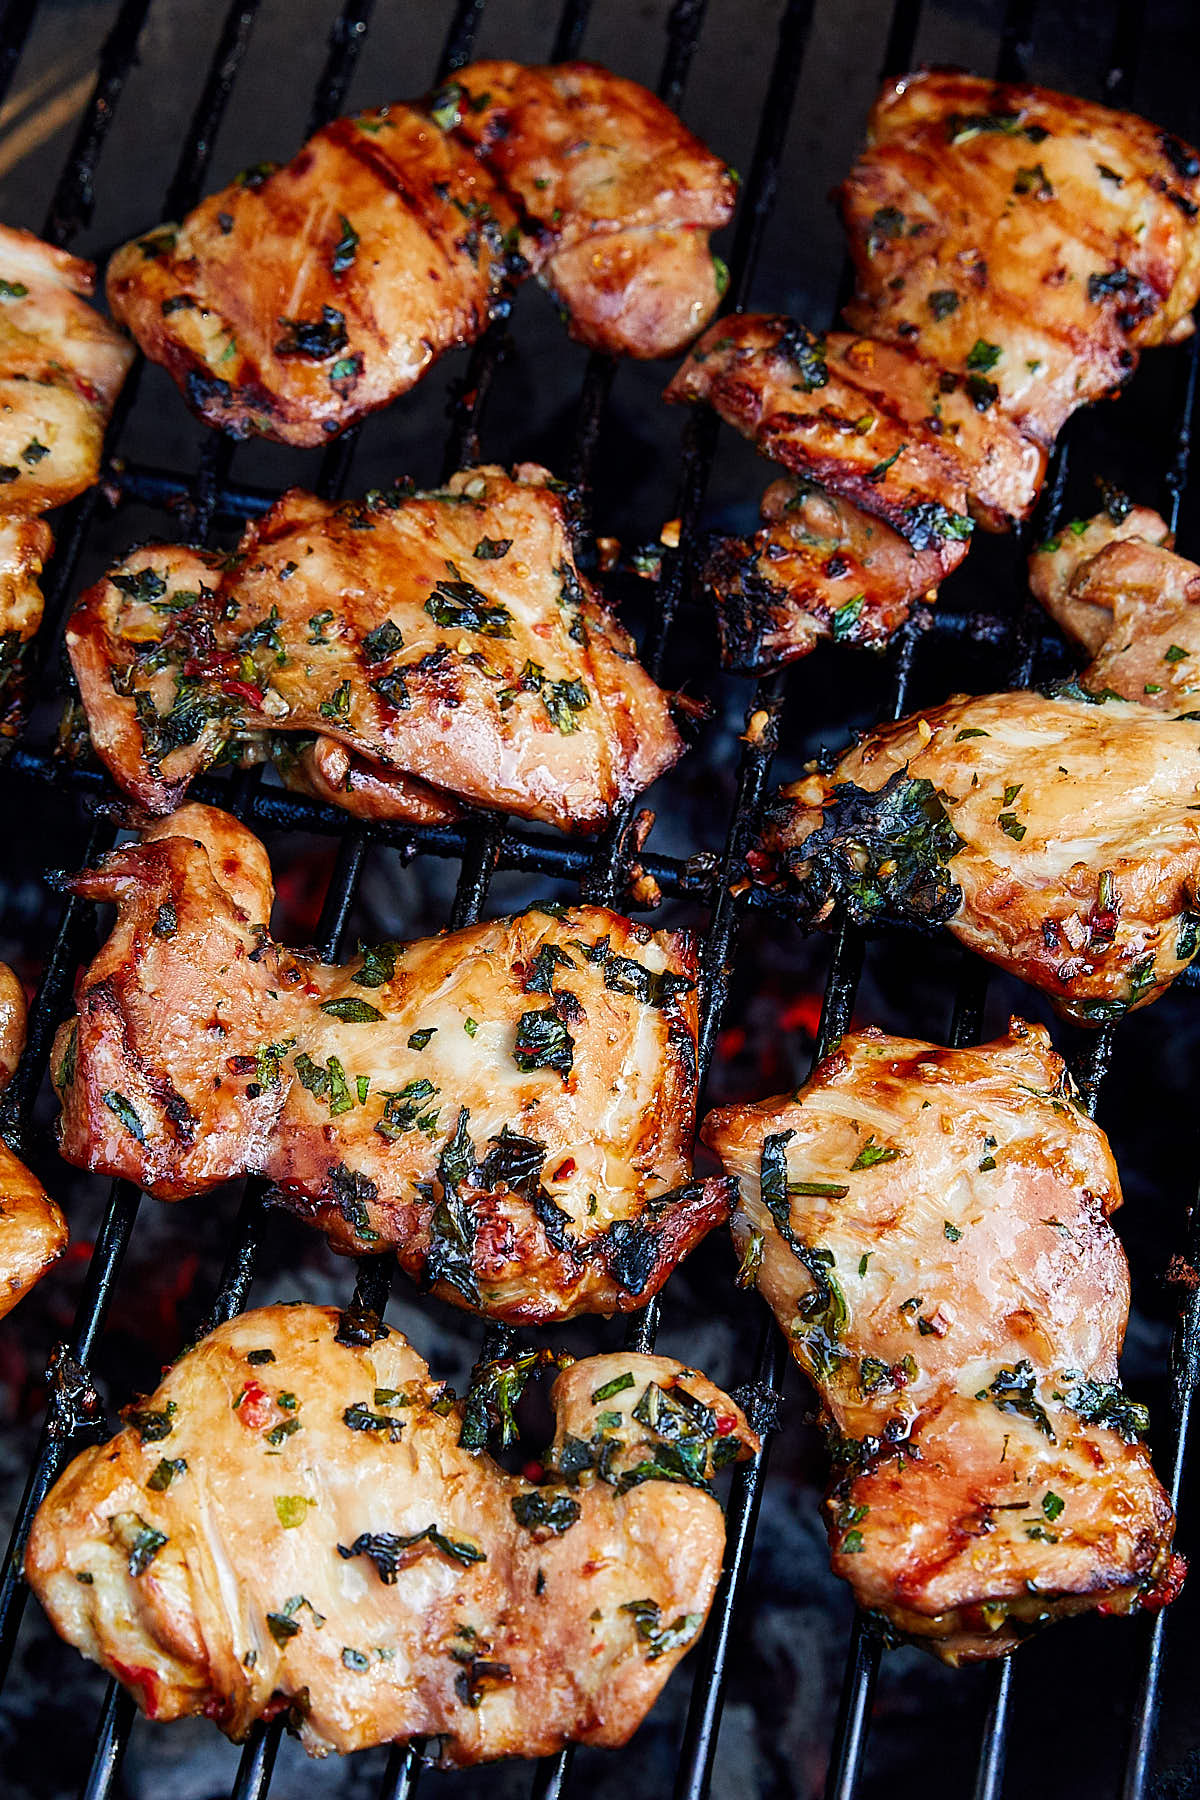 Marinated in Thai marinade, chicken thighs on a grill.